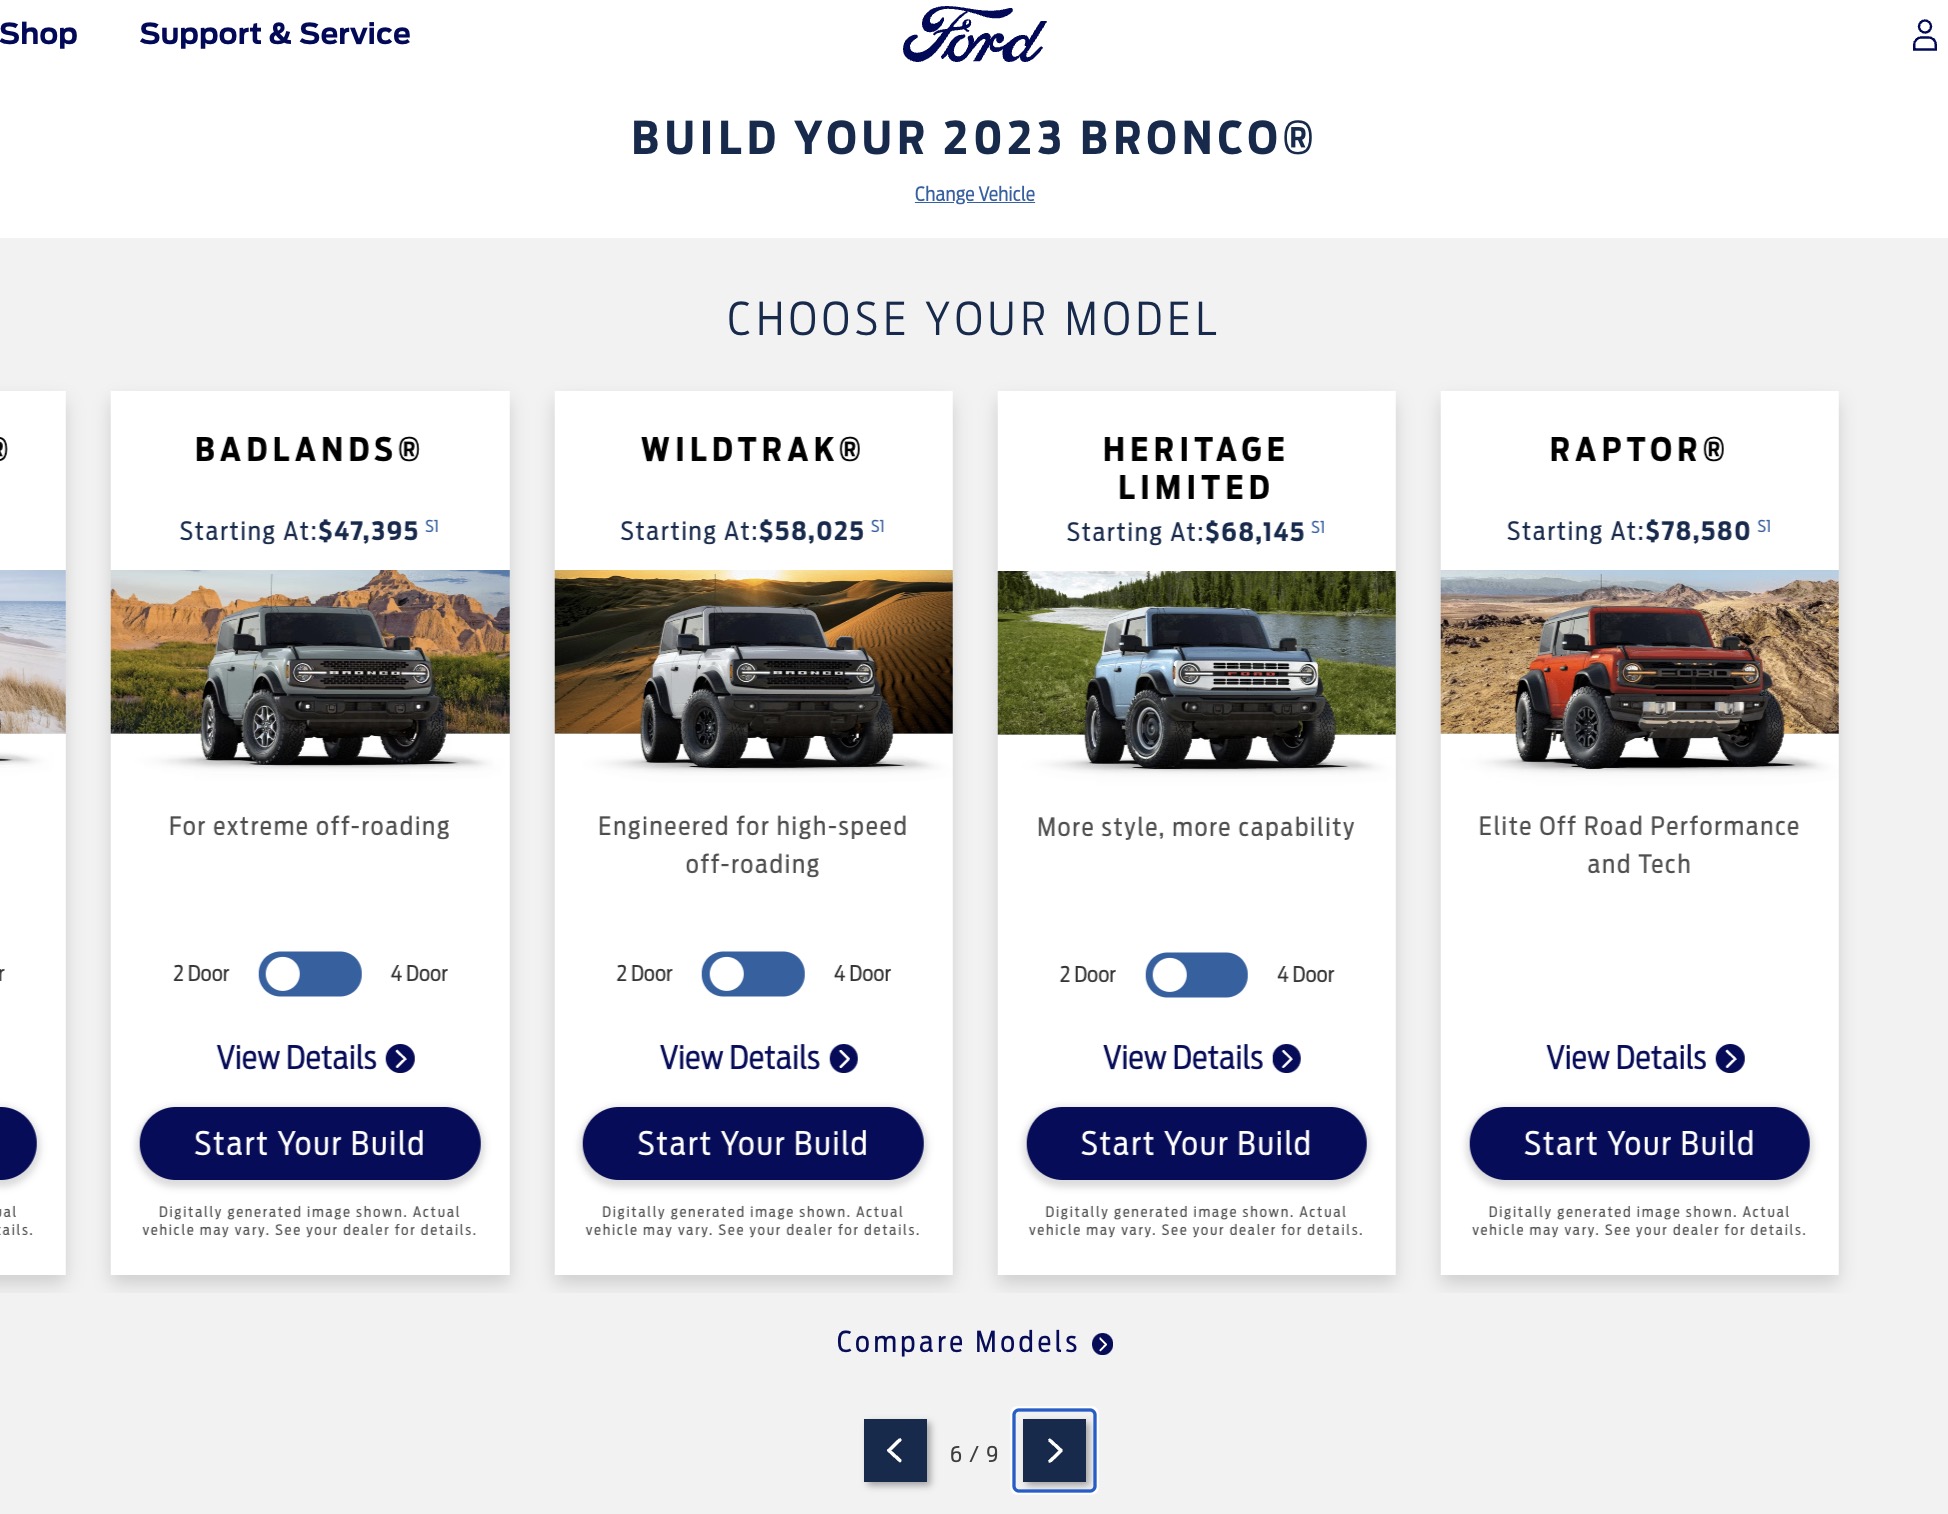 Ordering update 2023 Bronco retail order banks still open as of now (3